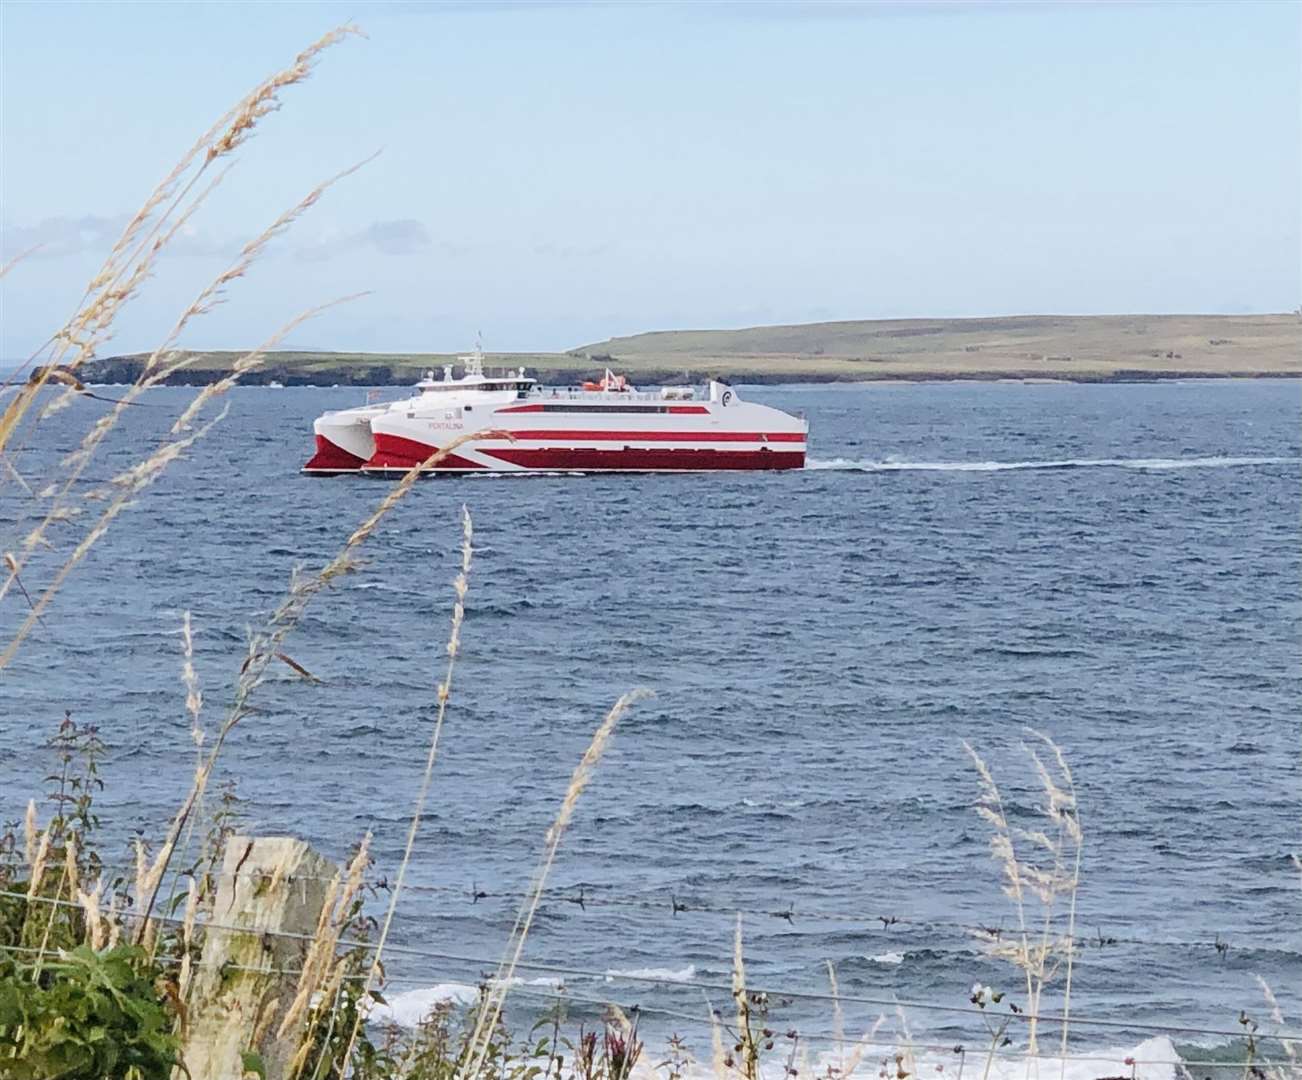 The Pentalina arriving at Gills harbour earlier in 2023 with Stroma in the background, by Lyall Rennie.